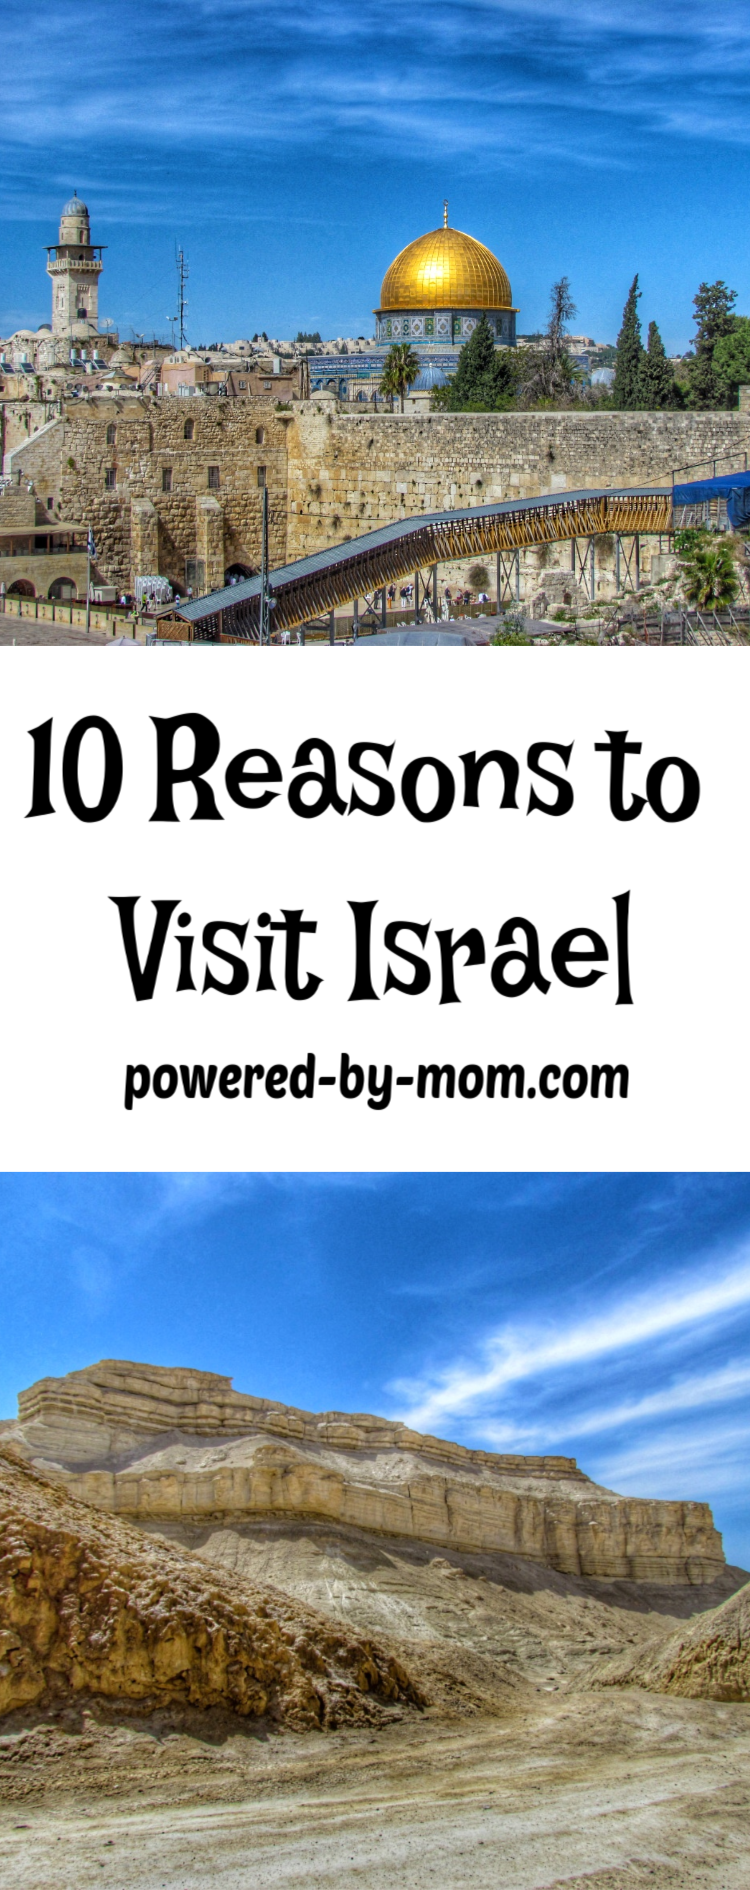 Have you ever dreamed of taking a vacation to visit Israel? This country is a place rich in history and great beauty. Learn about ten great reasons to head there on your next adventure.